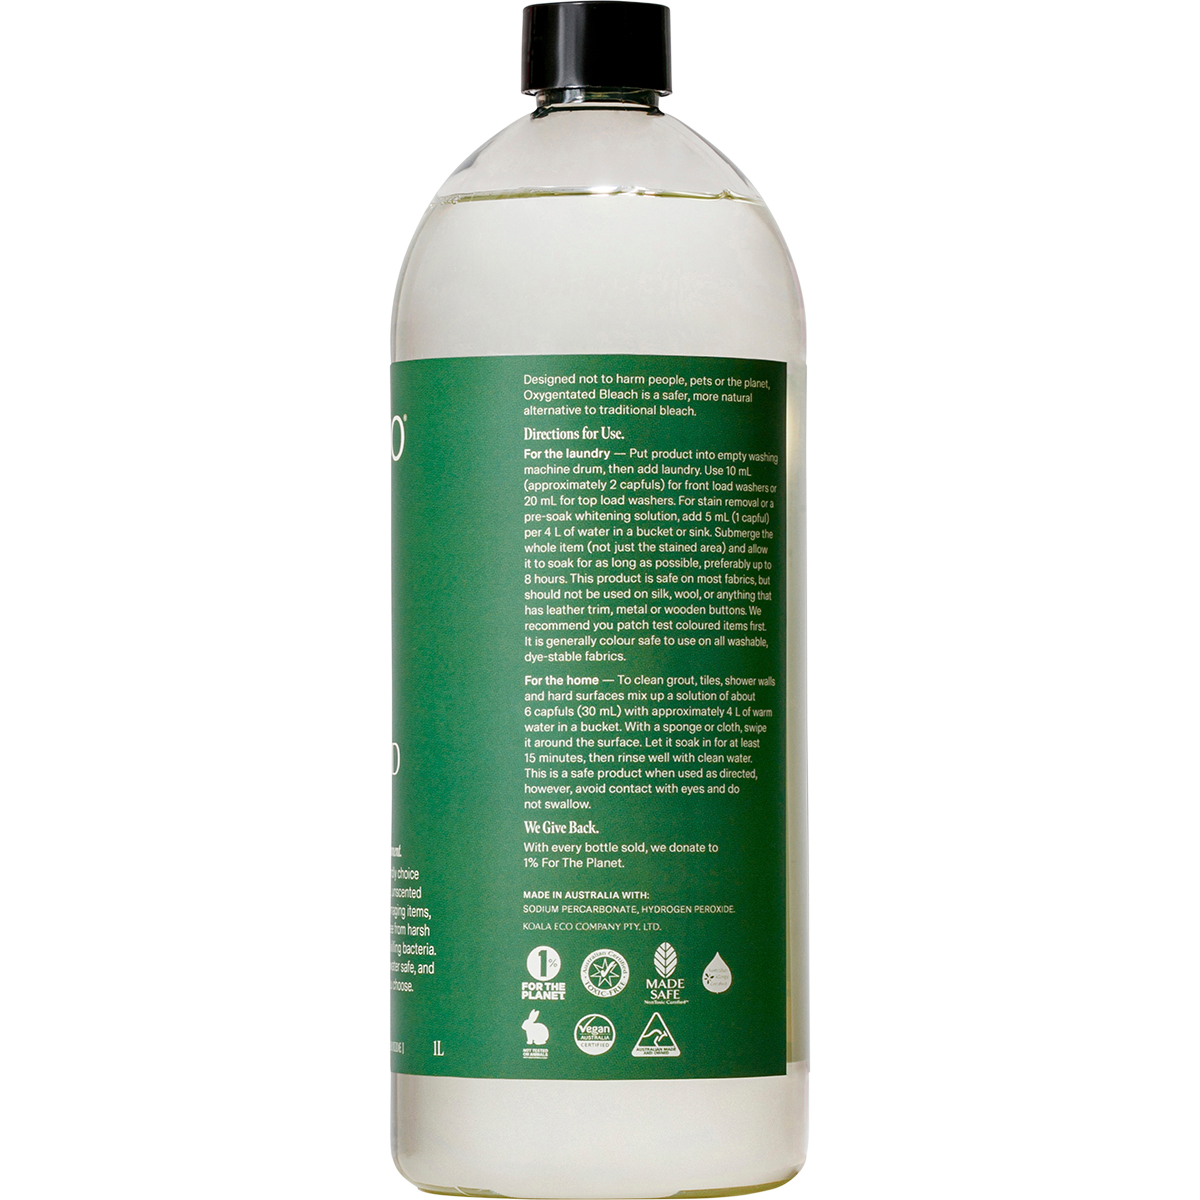 koala eco oxygenated bleach bottle, low tox cleaning solution